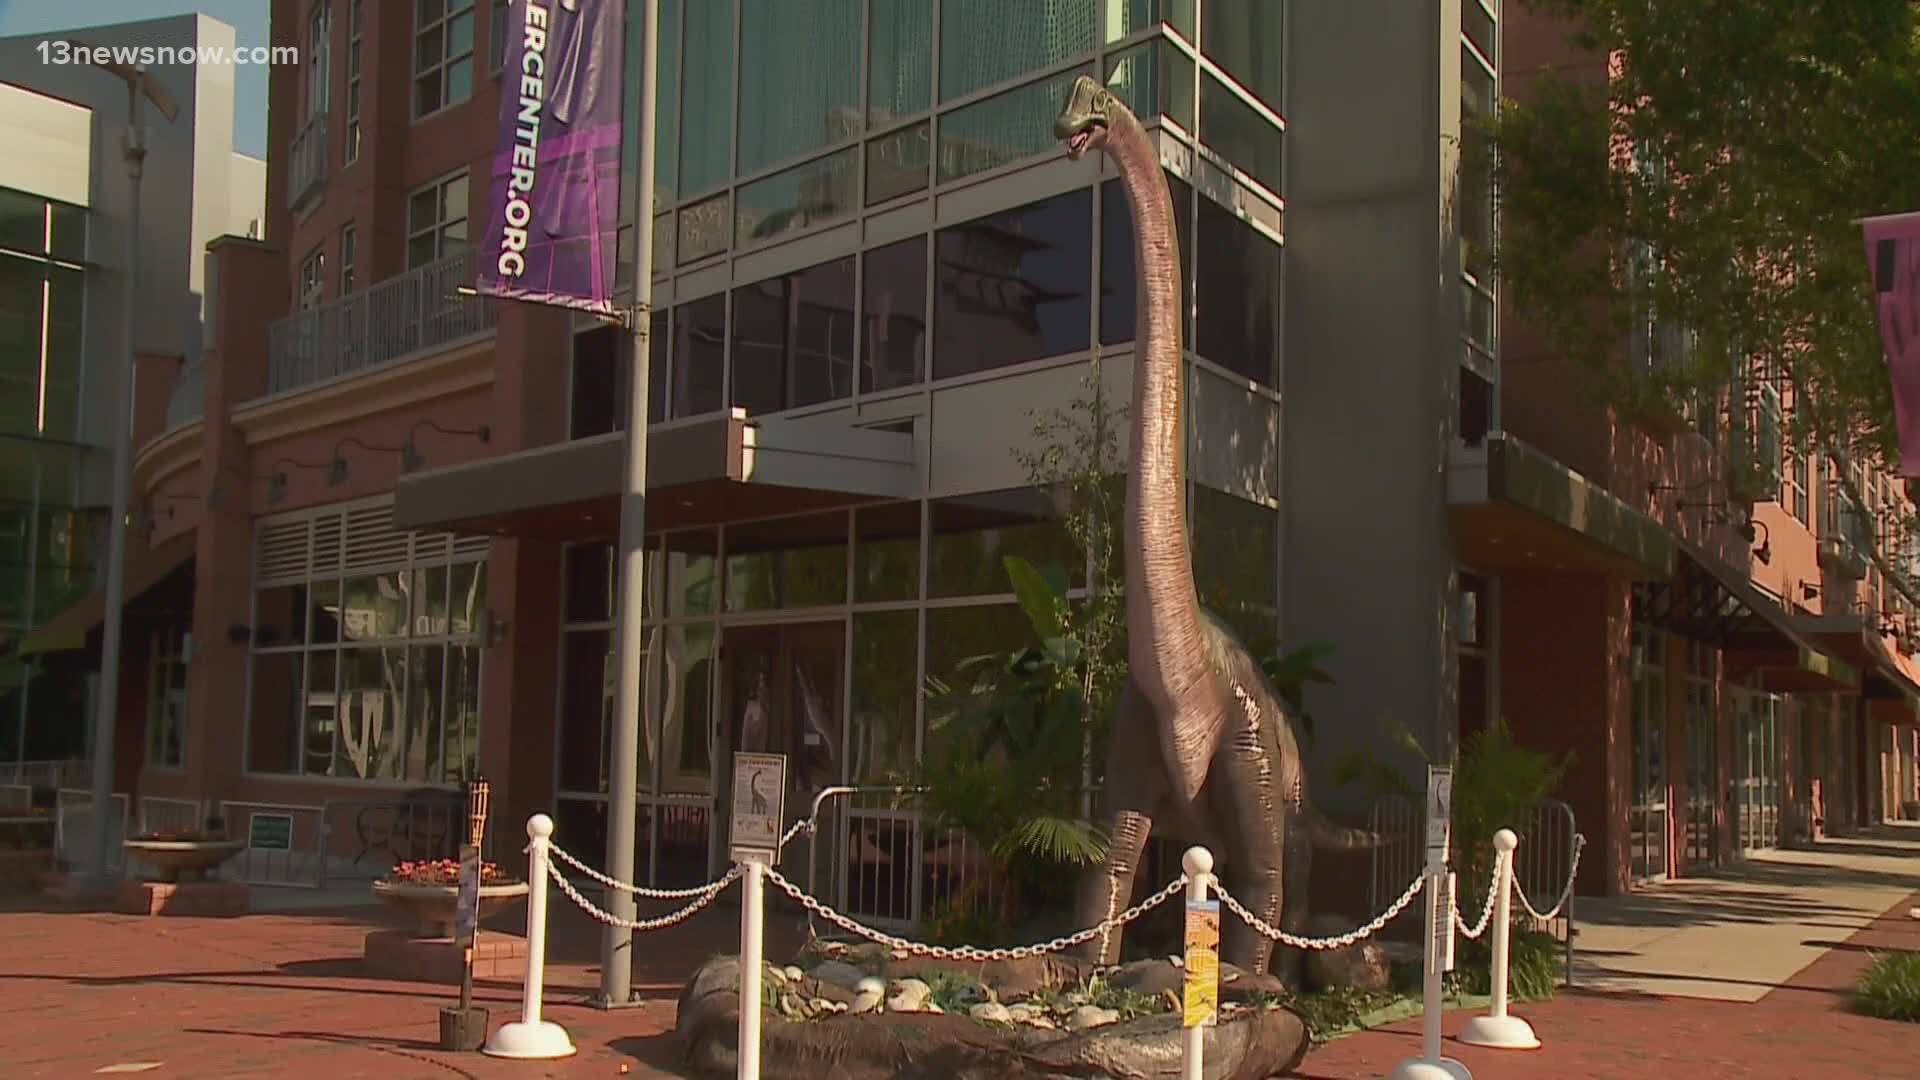 The dinosaur models are spread all over Town Center in Virginia Beach. The exhibit will stay up until July 19, 2020.